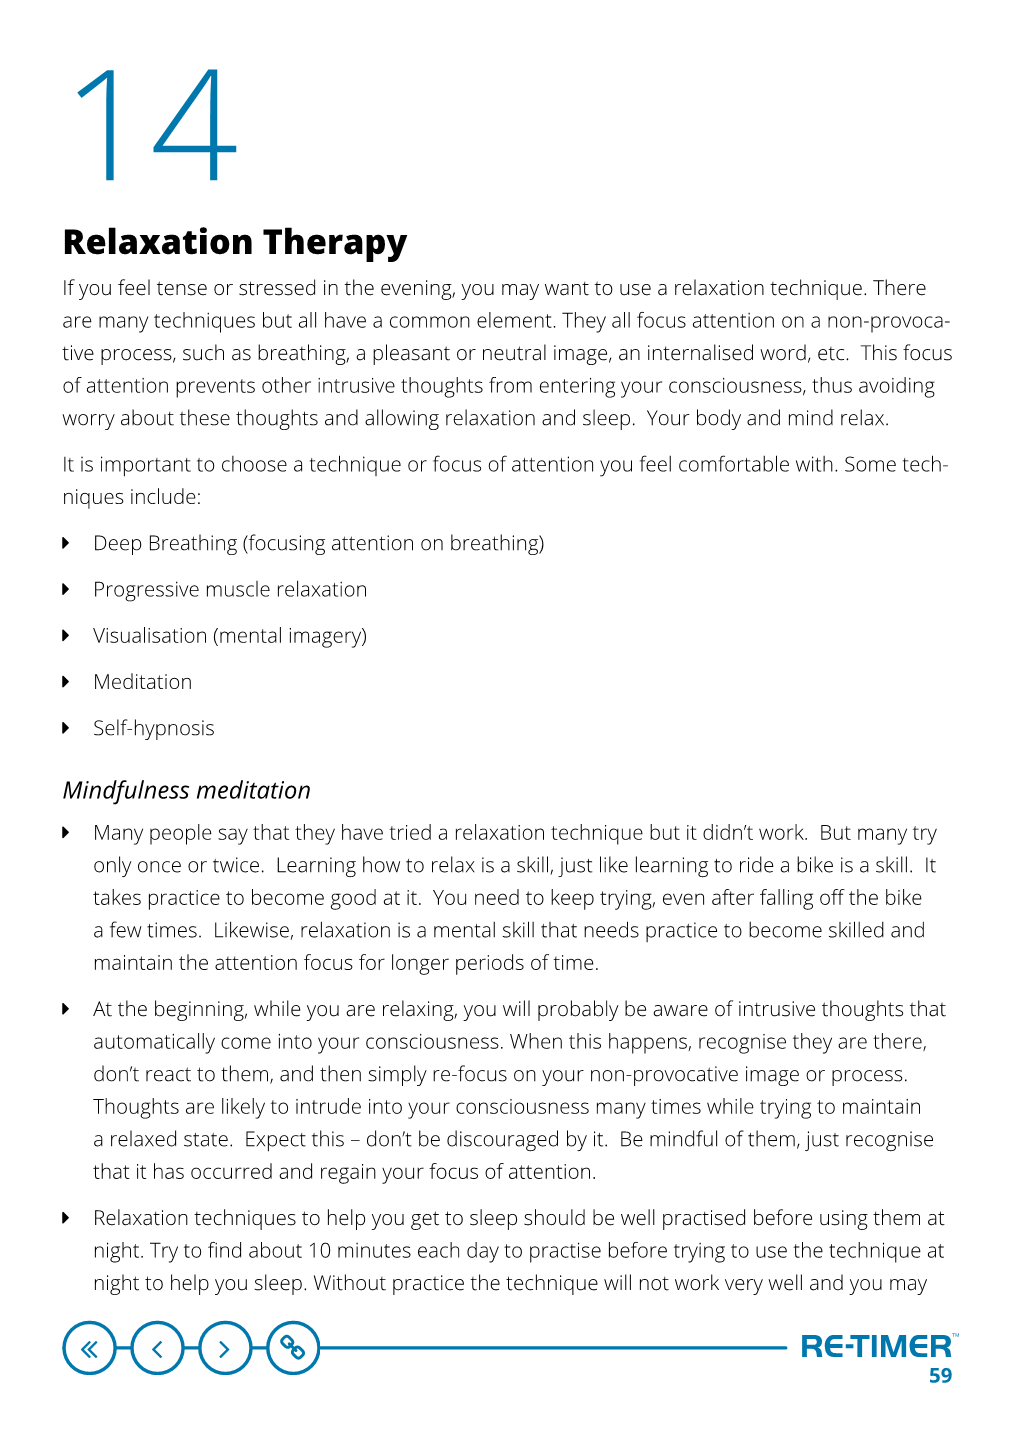 Relaxation Therapy If You Feel Tense Or Stressed in the Evening, You May Want to Use a Relaxation Technique